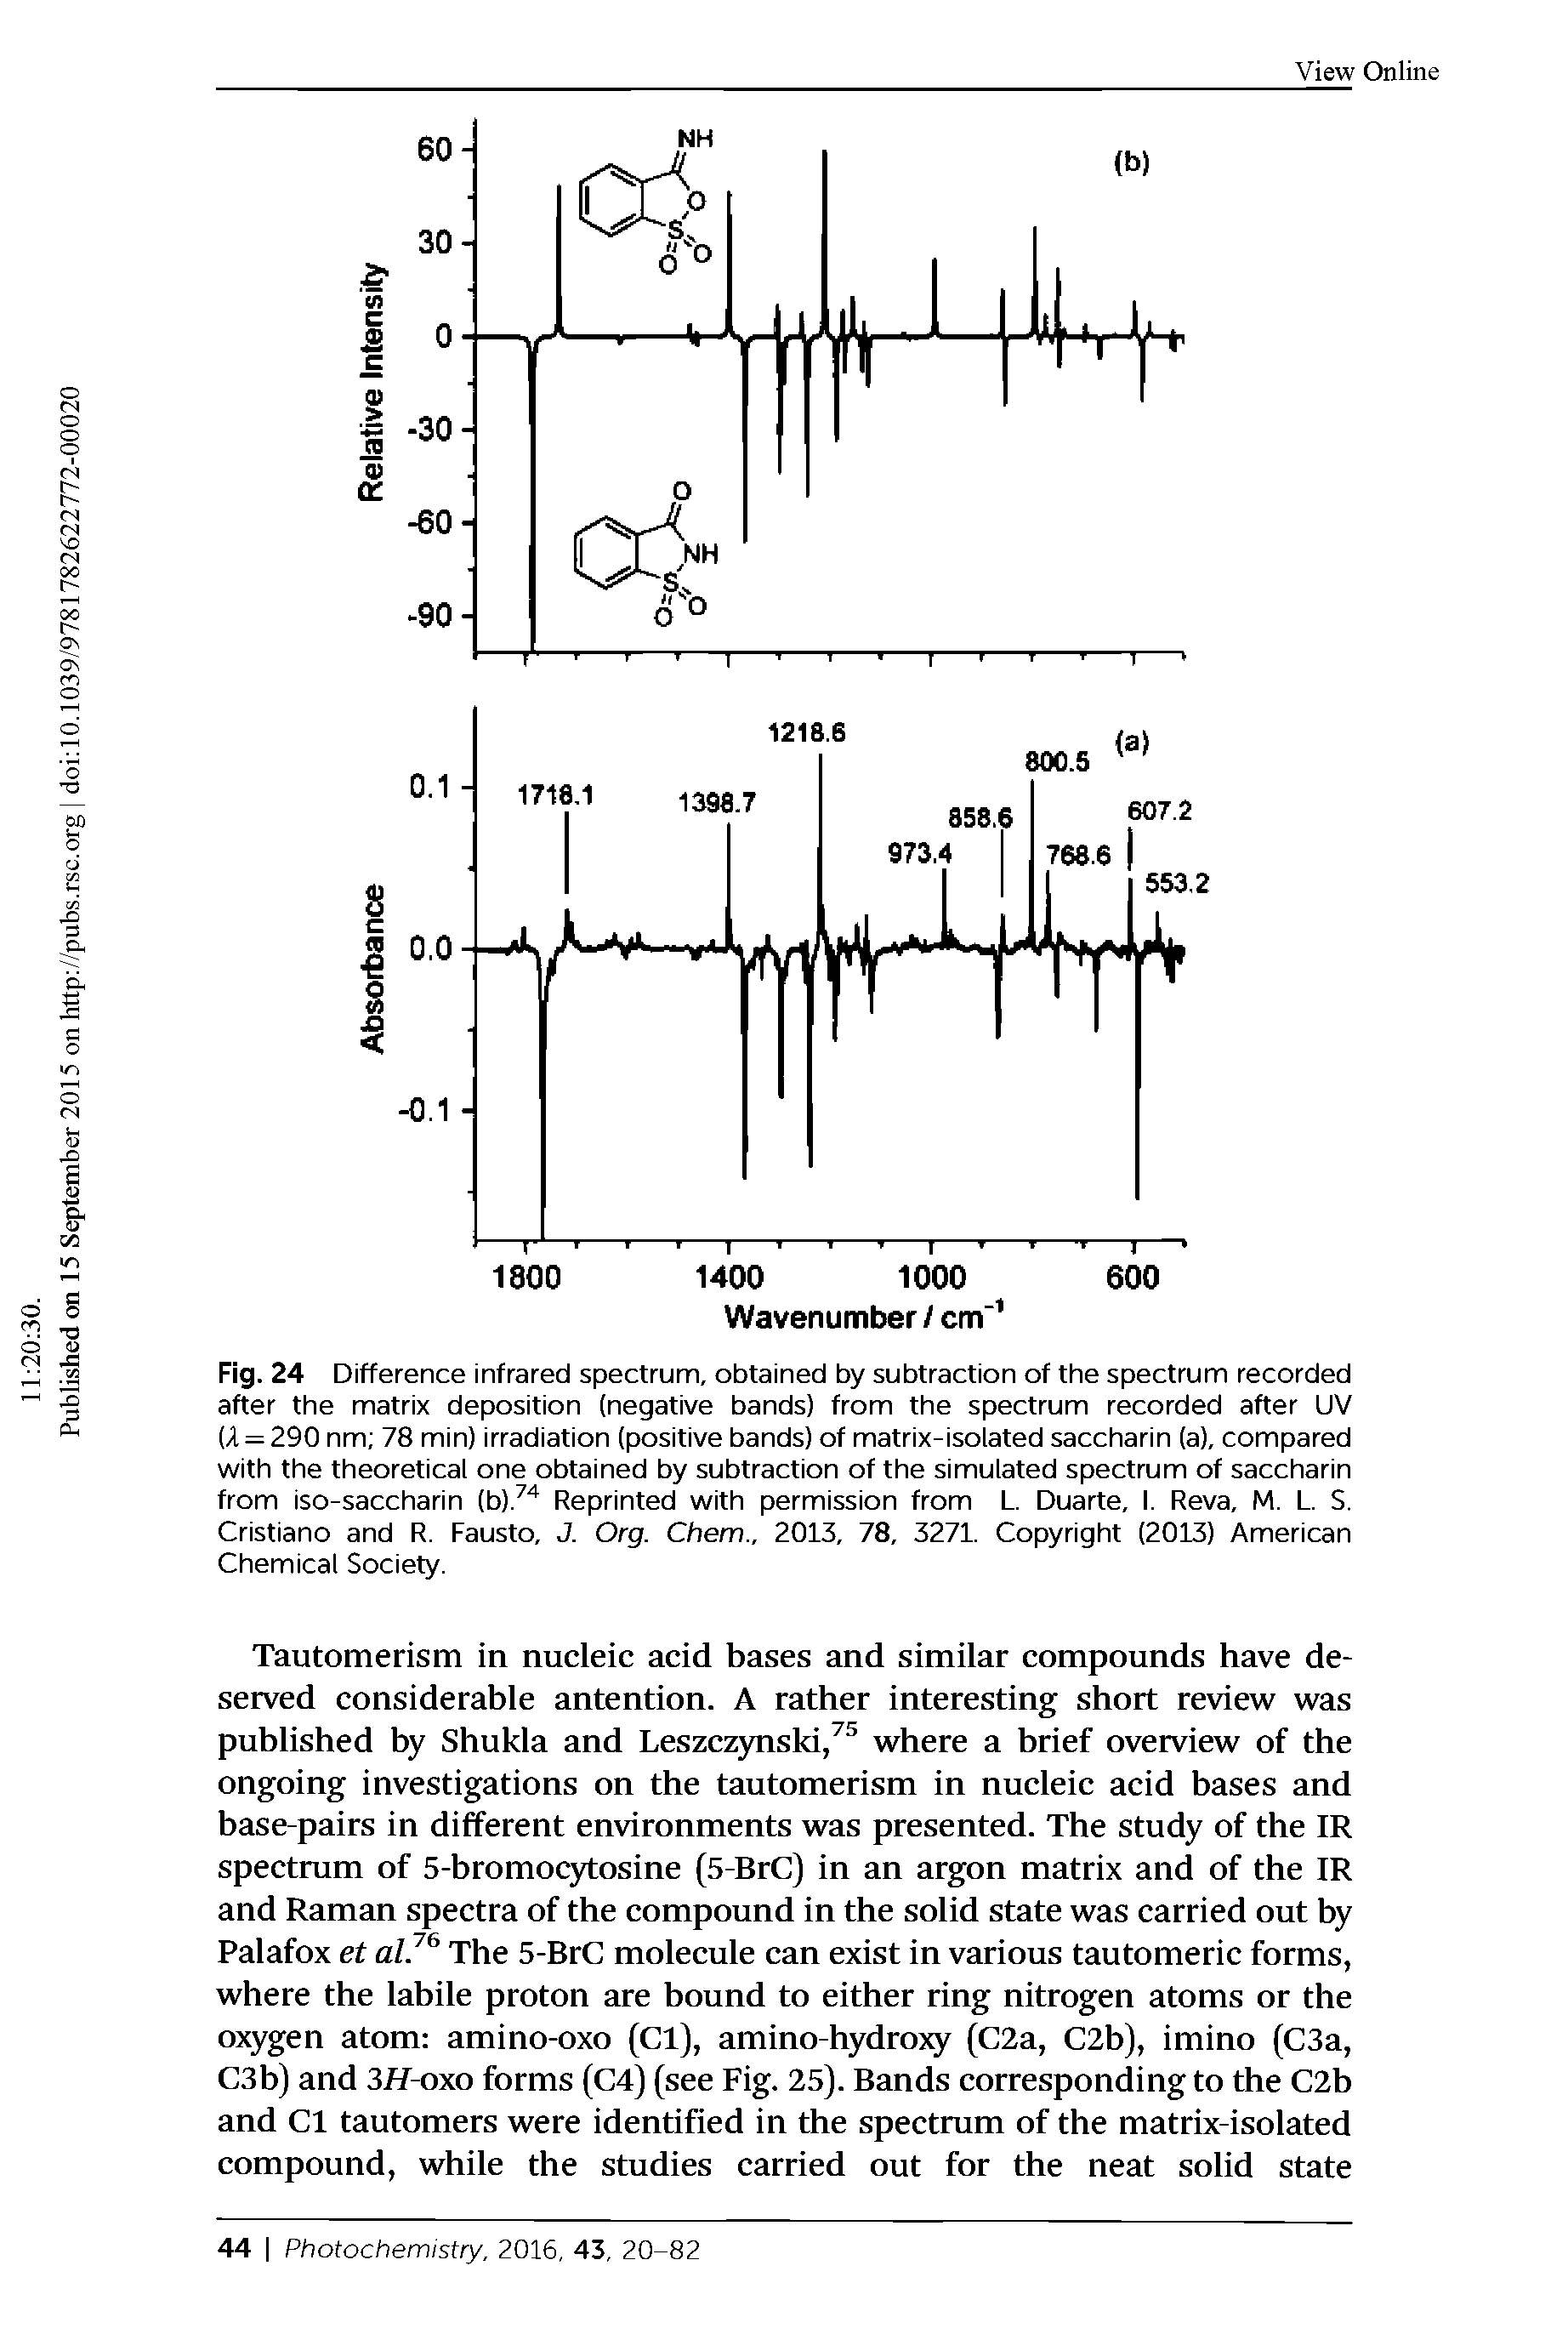 Fig. 24 Difference infrared spectrum, obtained by subtraction of the spectrum recorded after the matrix deposition (negative bands) from the spectrum recorded after UV (A = 290 nm 78 min) irradiation (positive bands) of matrix-isolated saccharin (a), compared with the theoretical one obtained by subtraction of the simulated spectrum of saccharin from iso-saccharin Reprinted with permission from L. Duarte, 1. Reva, M. L. S. Cristiano and R. Fausto, J. Org. Chem., 2013, 78, 3271. Copyright (2013) American Chemical Society.